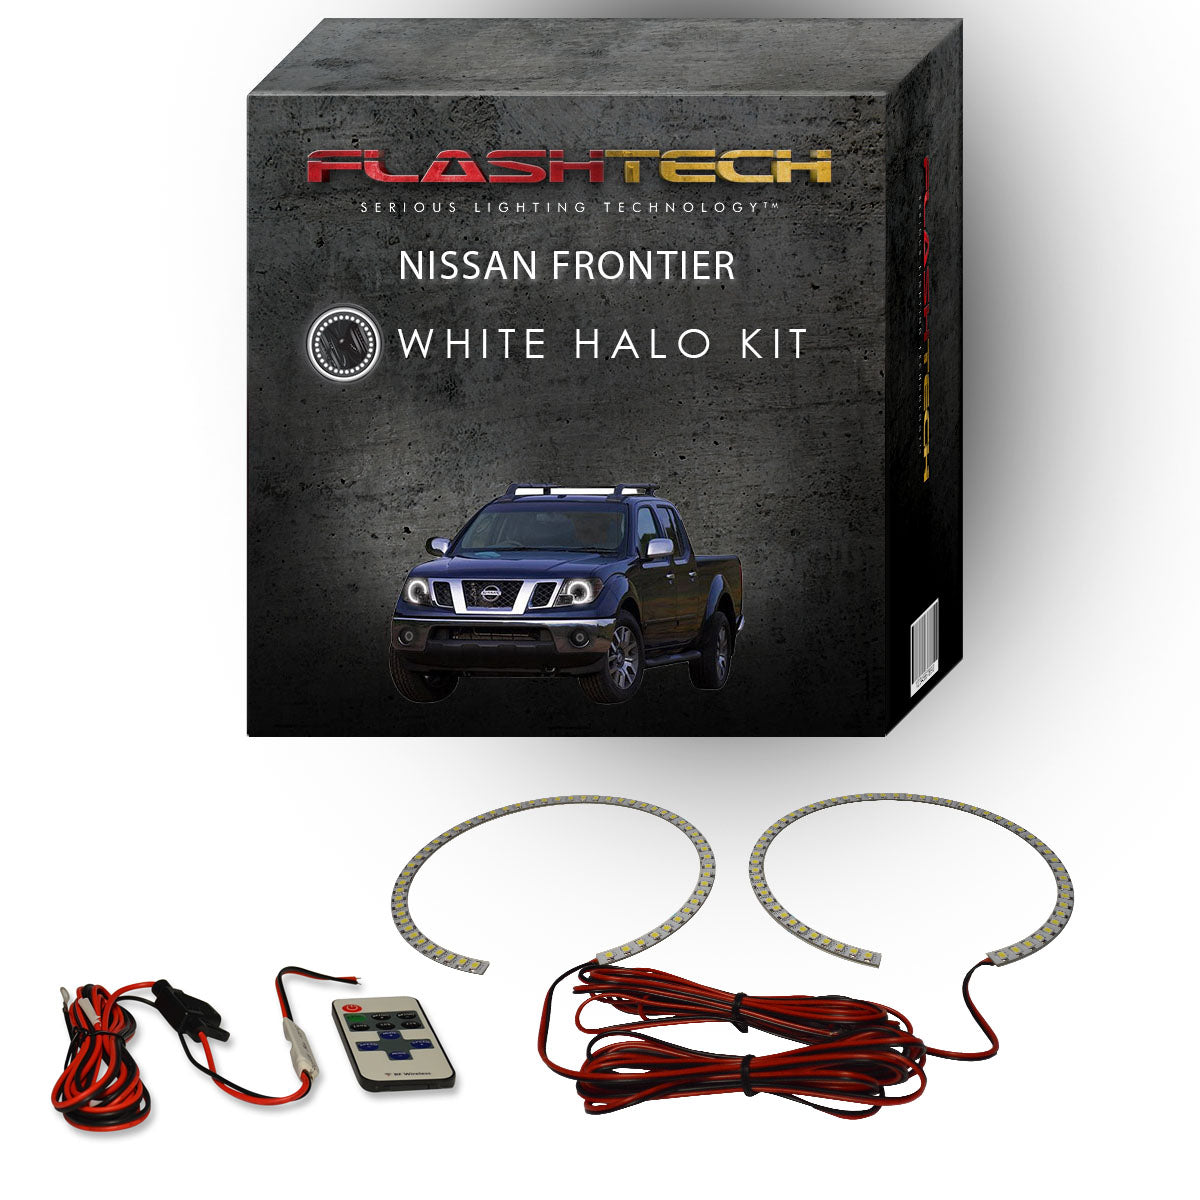 Nissan-Frontier-2009, 2010, 2011, 2012, 2013, 2014, 2015, 2016, 2017, 2018, 2019-LED-Halo-Headlights-White-RF Remote White-NI-FR0916-WHRF